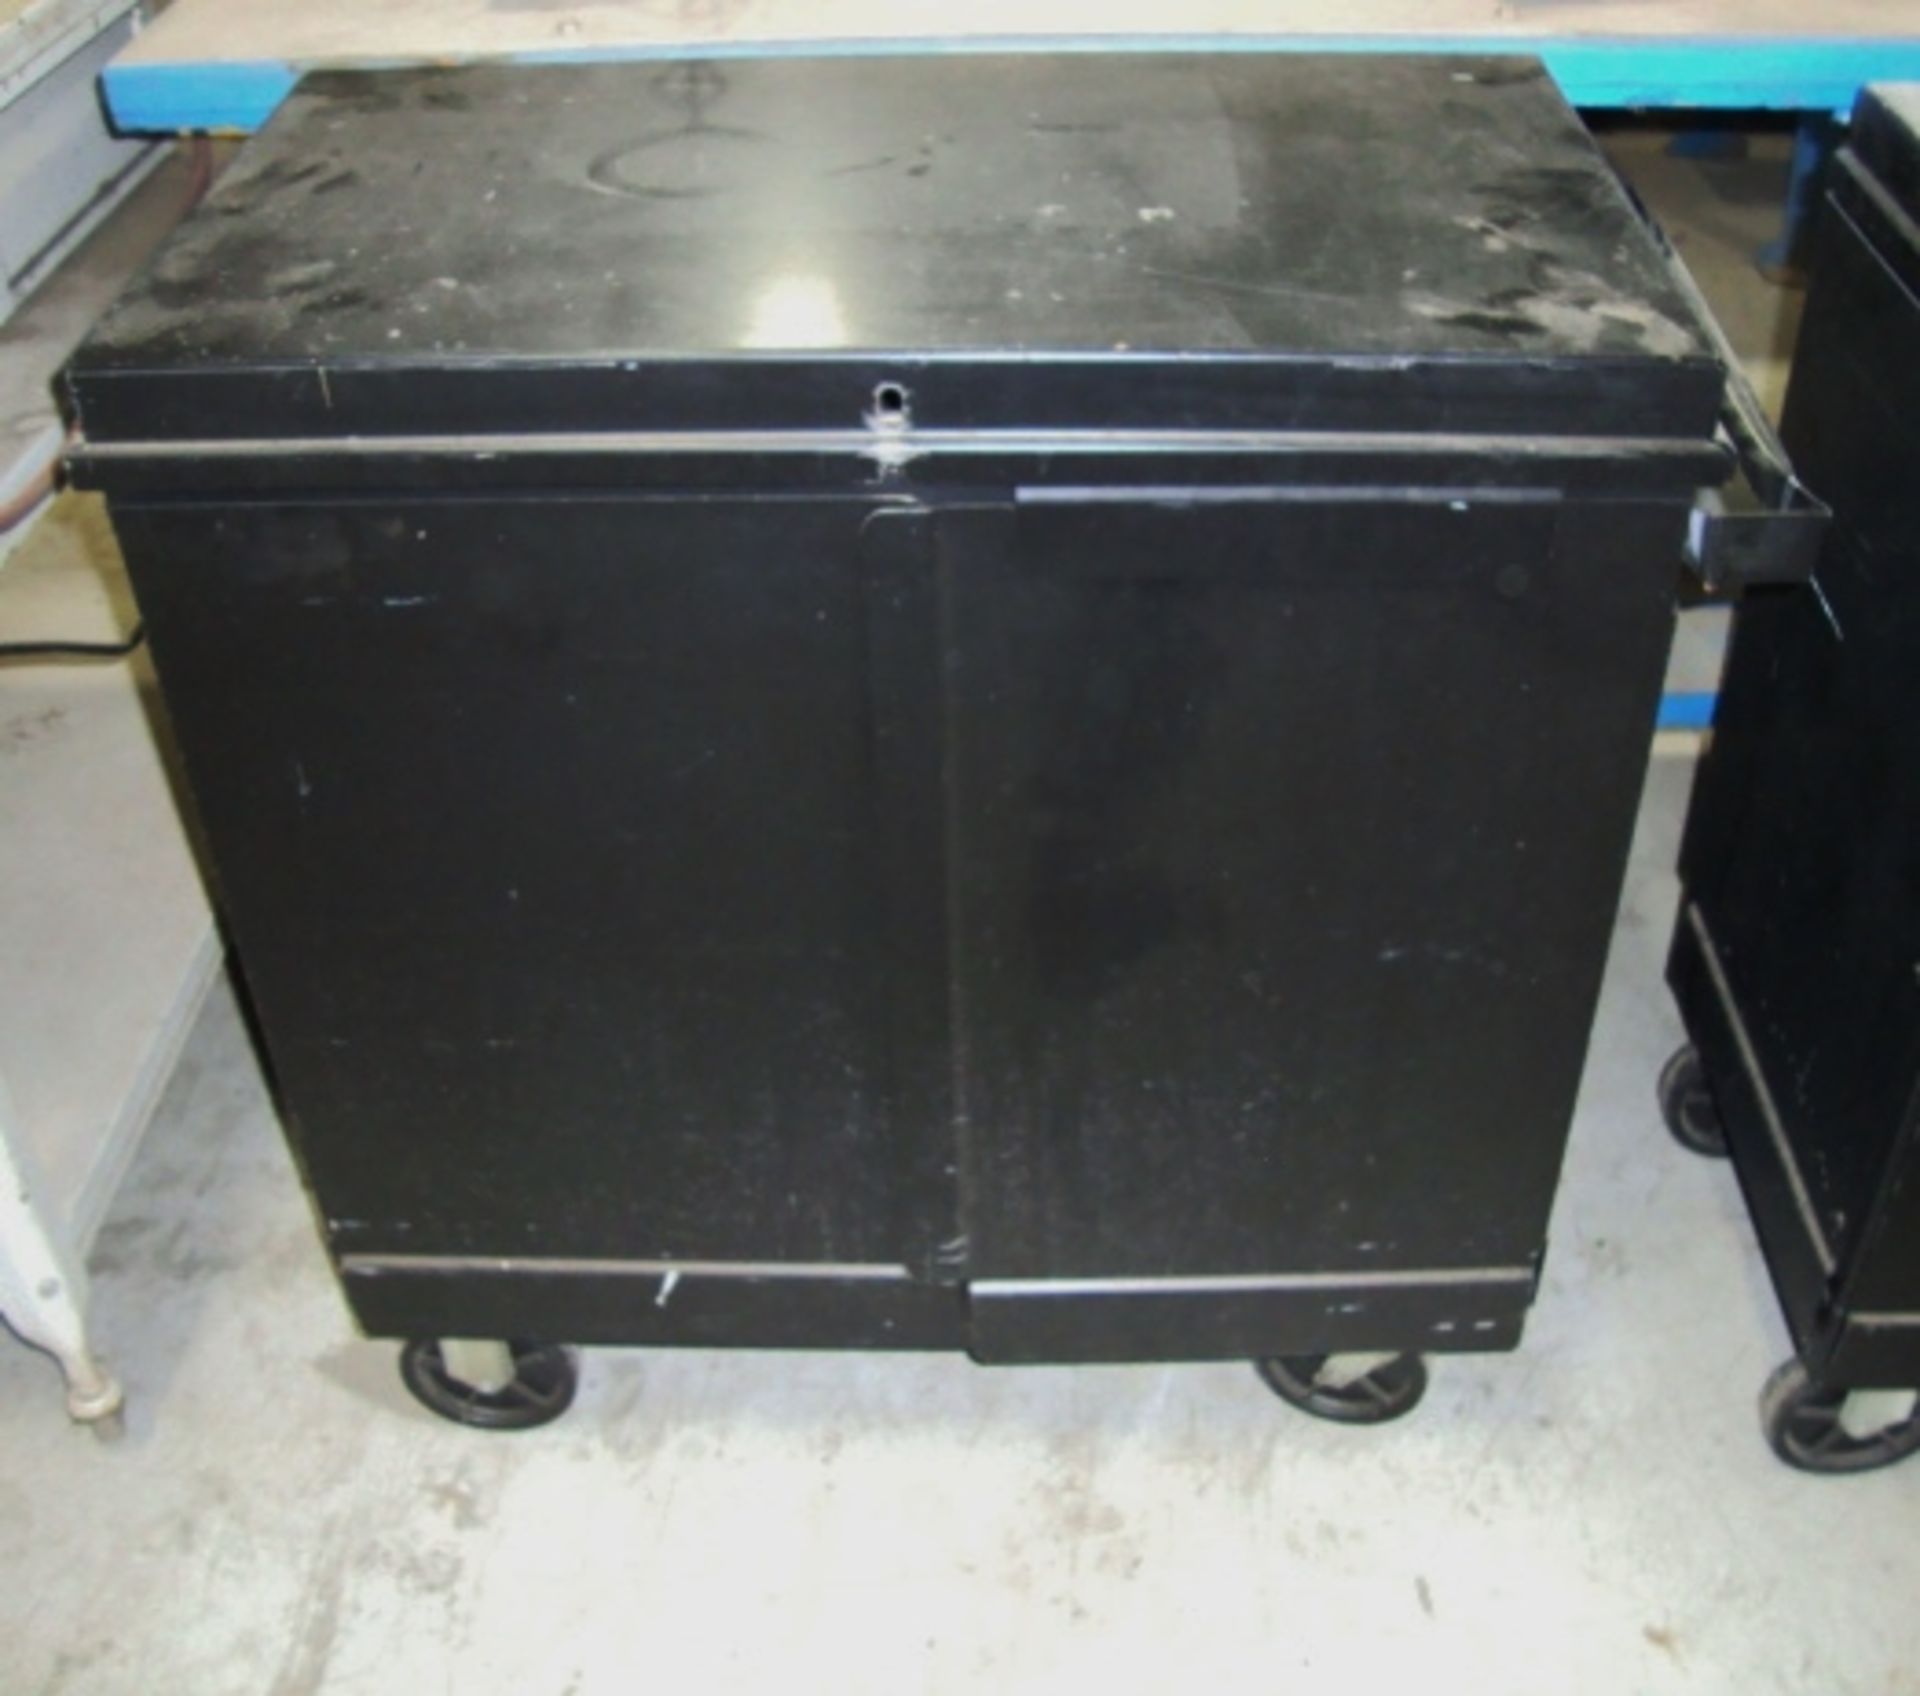 Mobile Tool Cabinet, approx. 30" x 16" x 34" tall